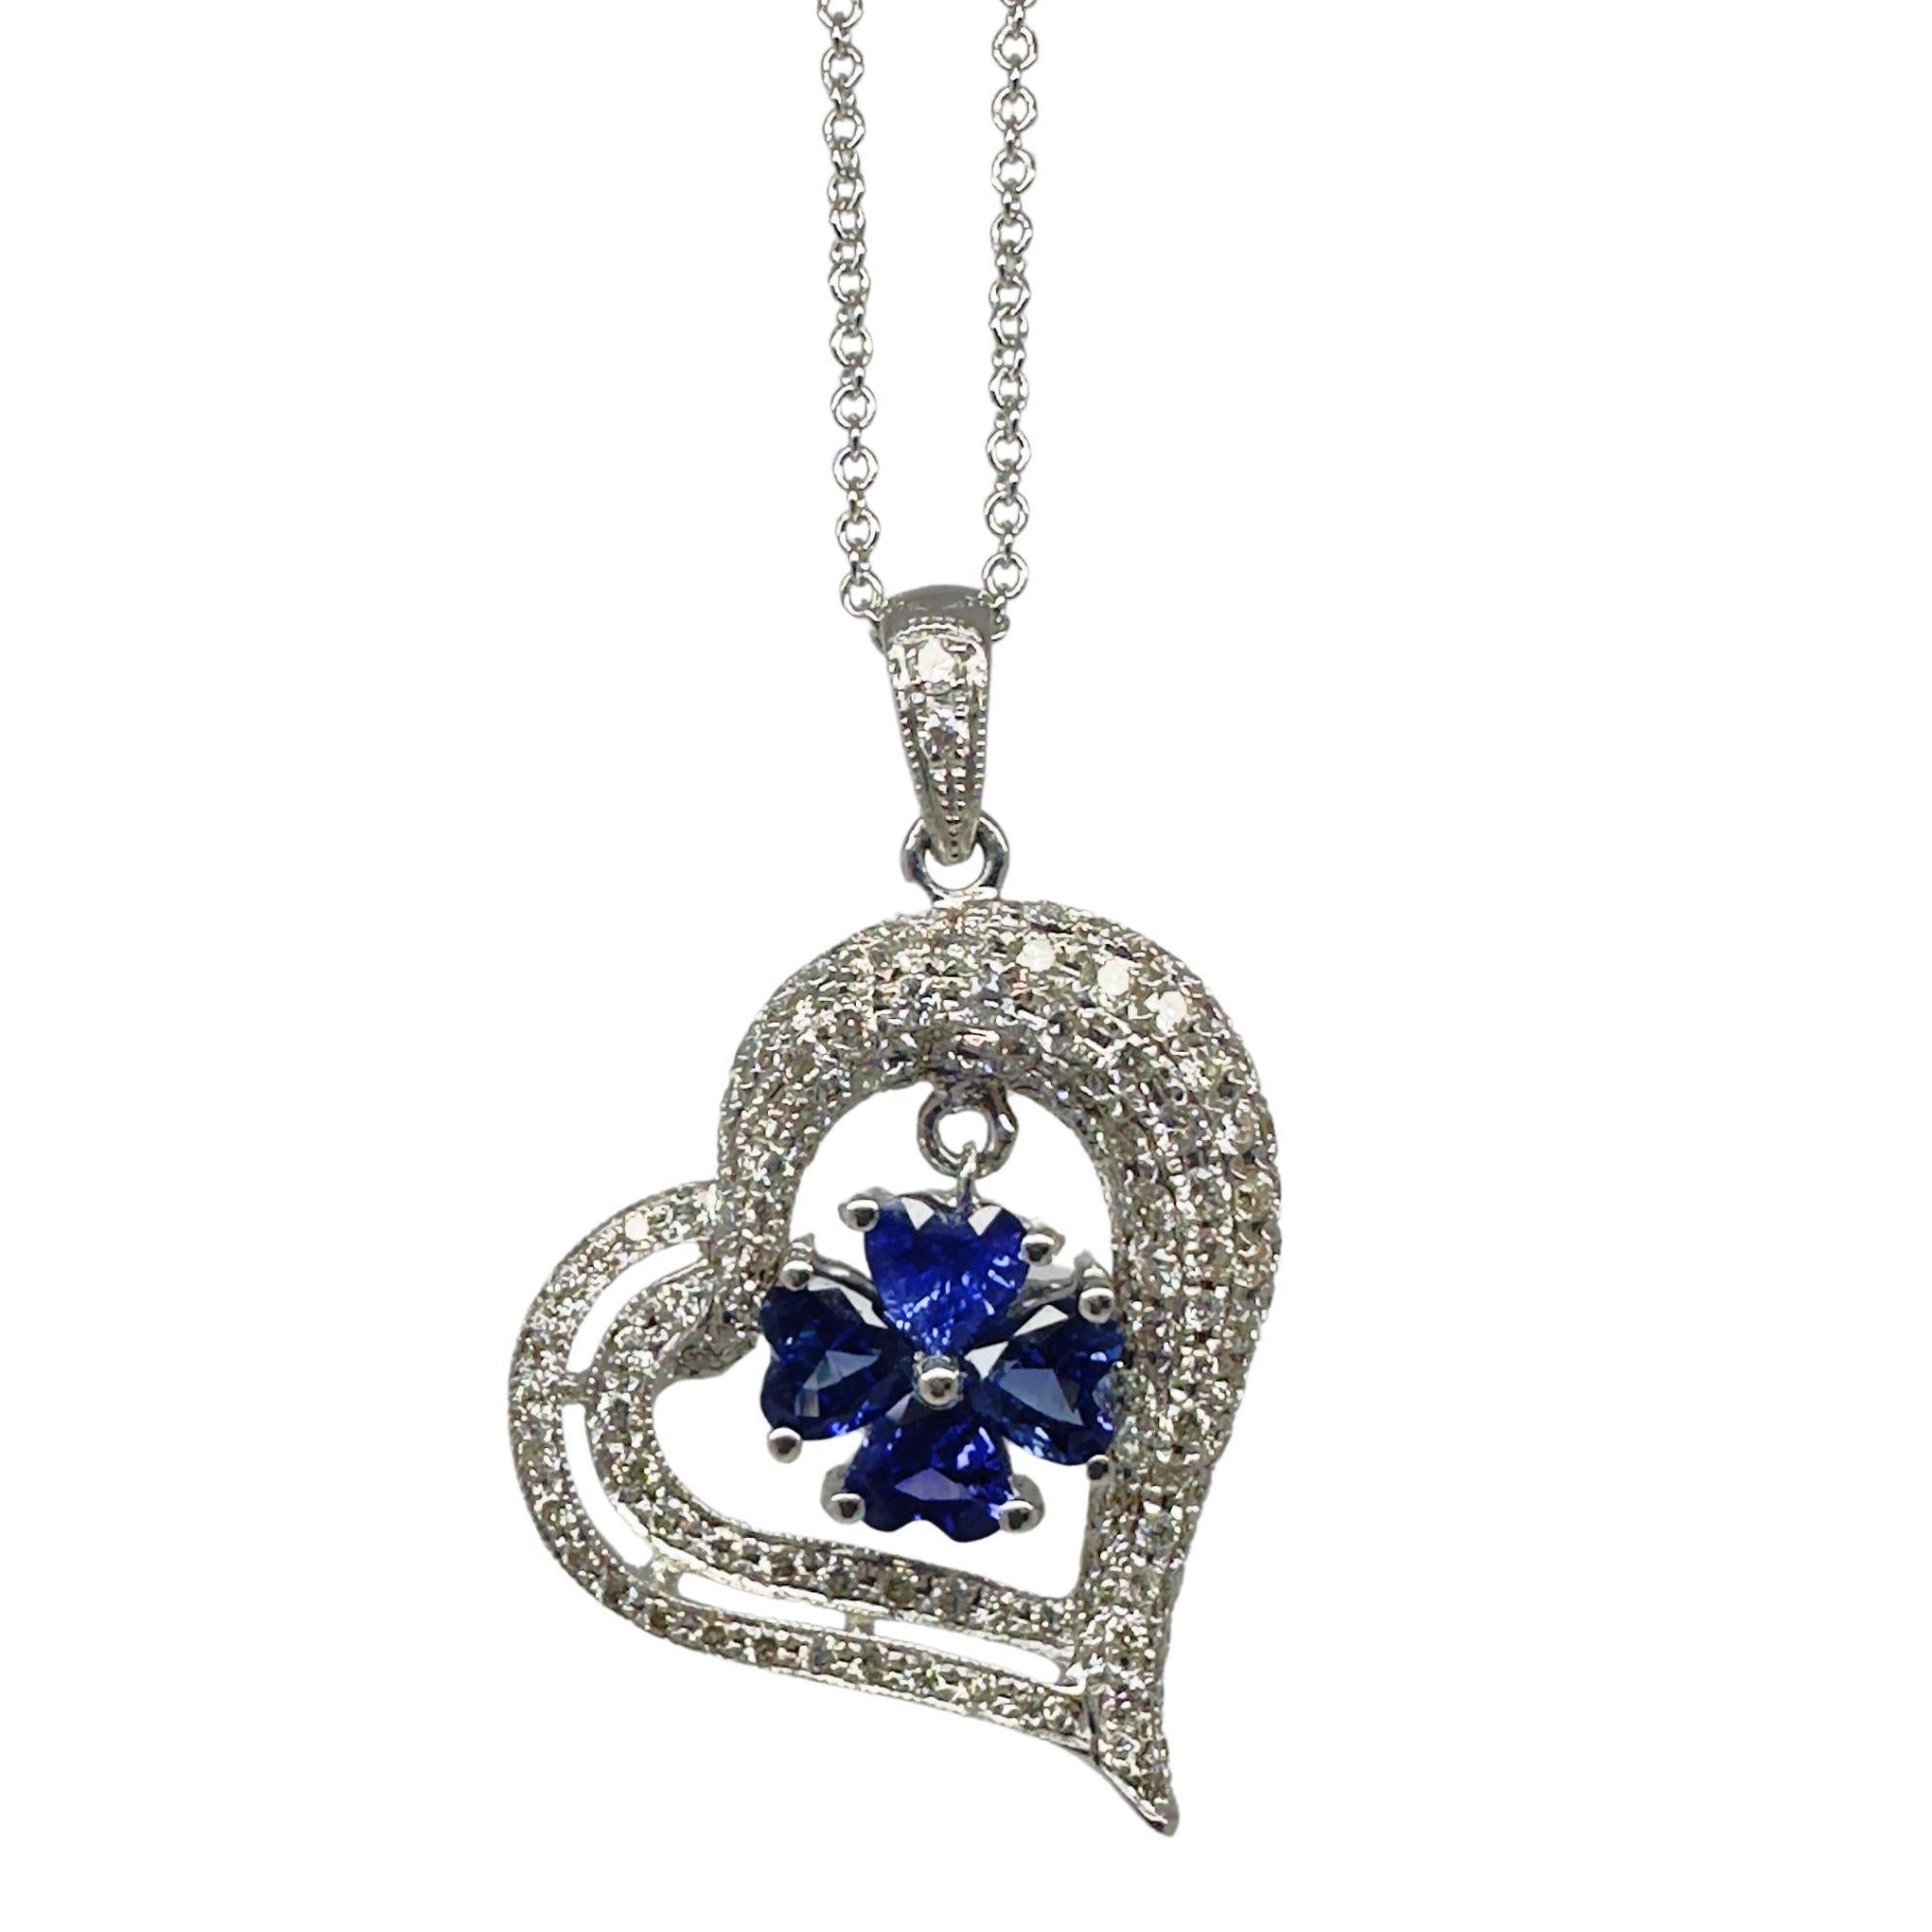 Add a touch of elegance to your look with our 18k Diamond and Sapphire Heart Pendant Necklace. The stunning combination of 1.23 carats of diamonds and 2.10 carats of sapphires will sparkle on your neck. The 18 inch chain can also be shortened to